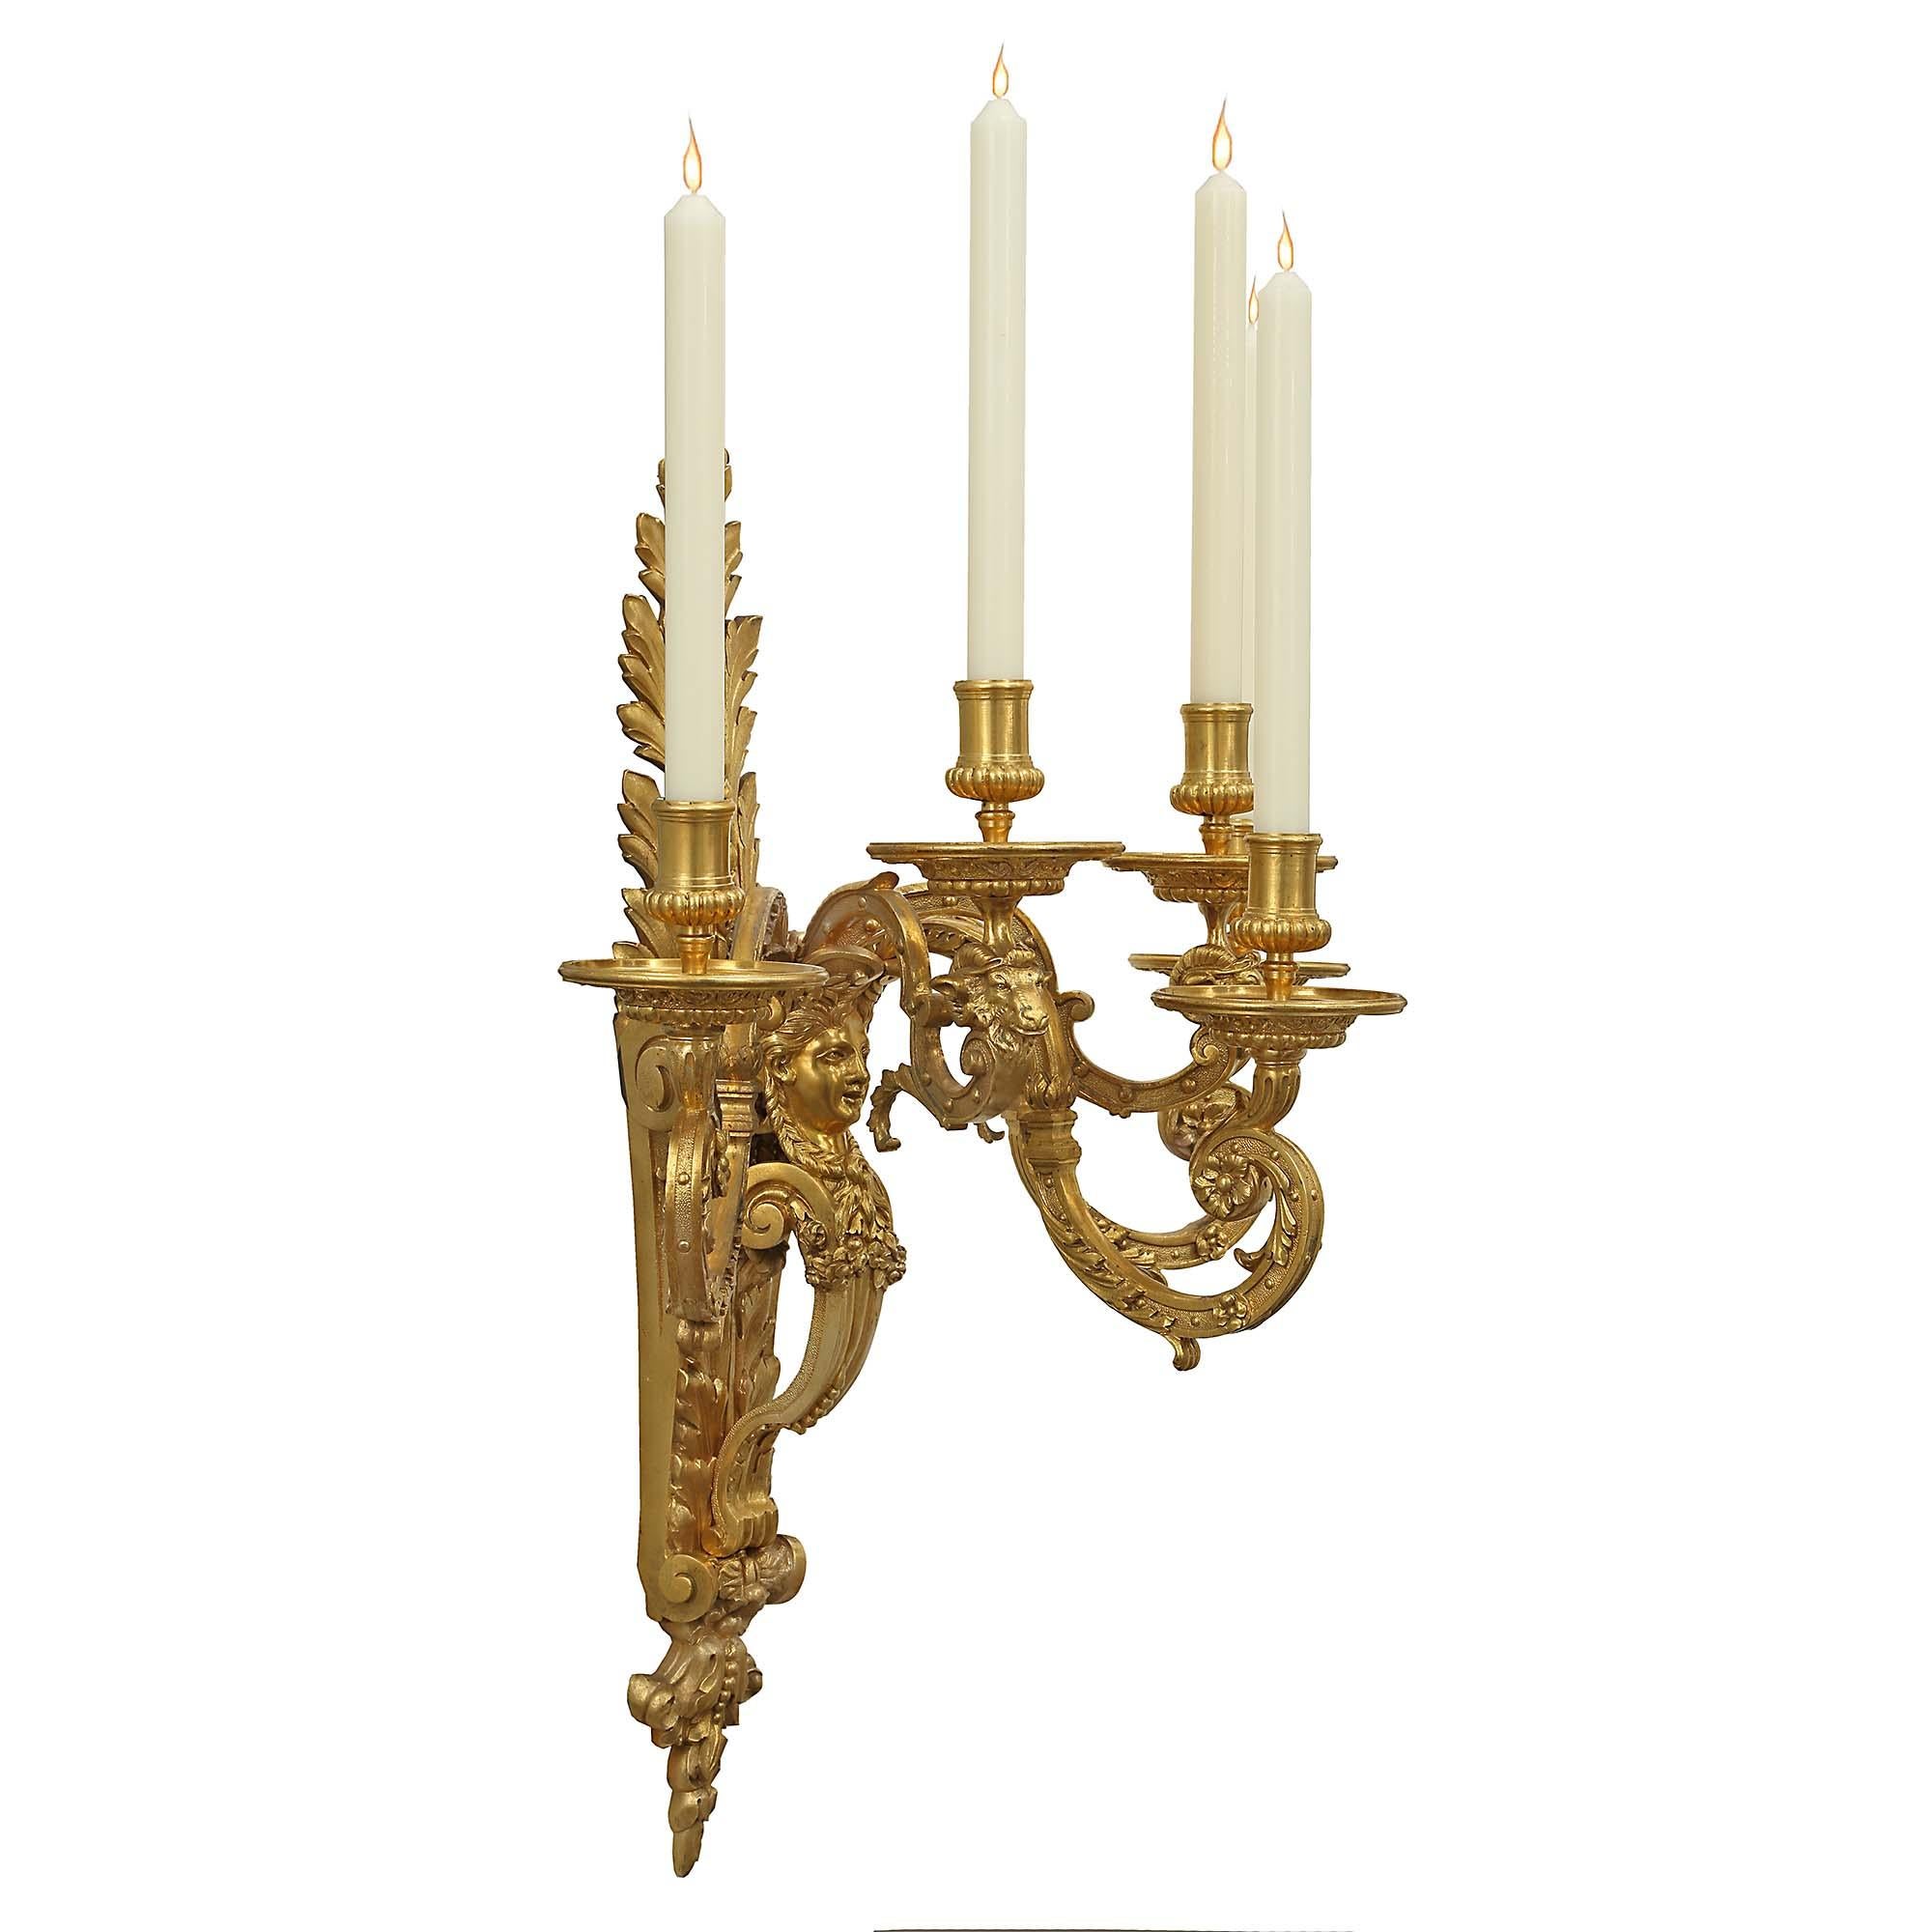 An impressive large scale pair of mid 19th century French Louis XIV st. ormolu five arm sconces. The richly chased pair with all original gilt has a back plate decorated by large acanthus leaves, and a central female figure with her hair braided